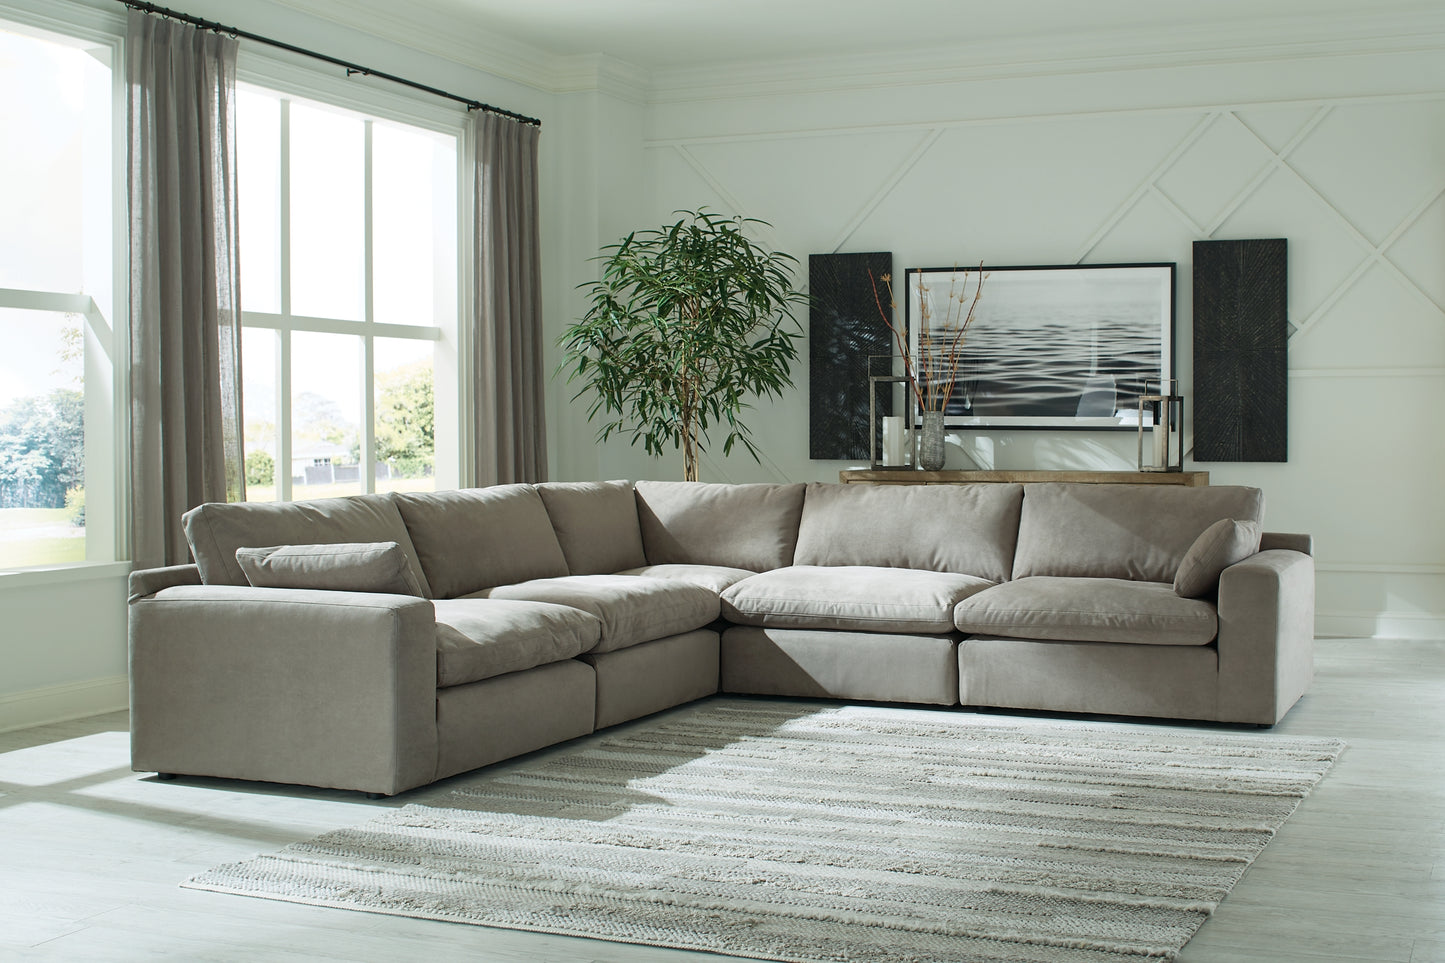 Next-Gen Gaucho 5-Piece Sectional with Ottoman JB's Furniture  Home Furniture, Home Decor, Furniture Store